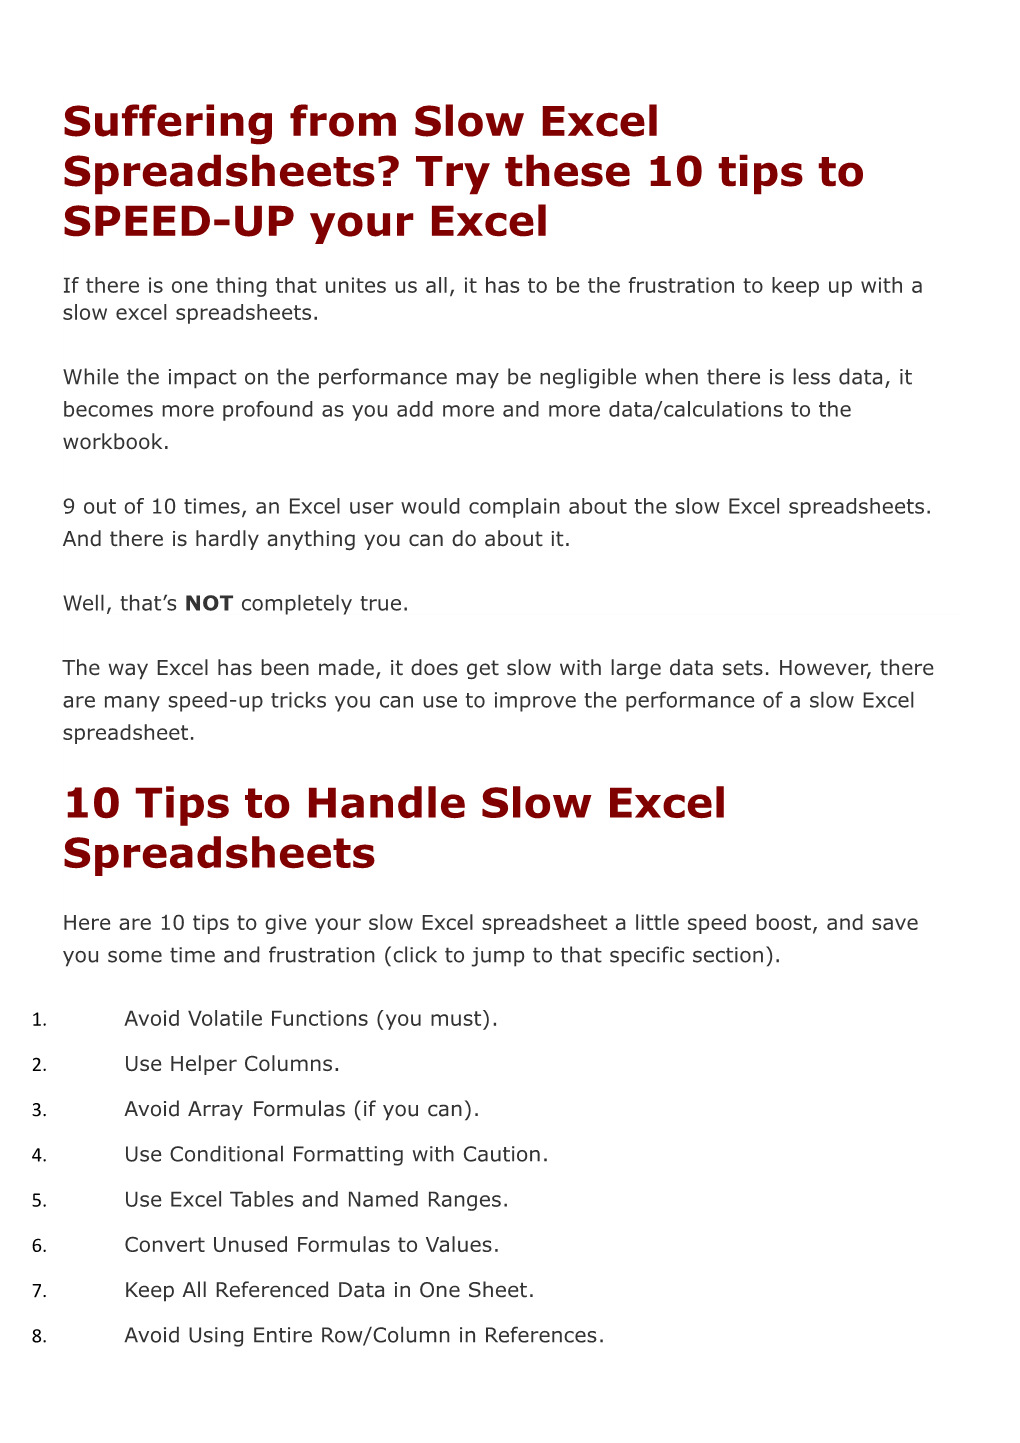 Tips to Handle Slow Excel Spreadsheets